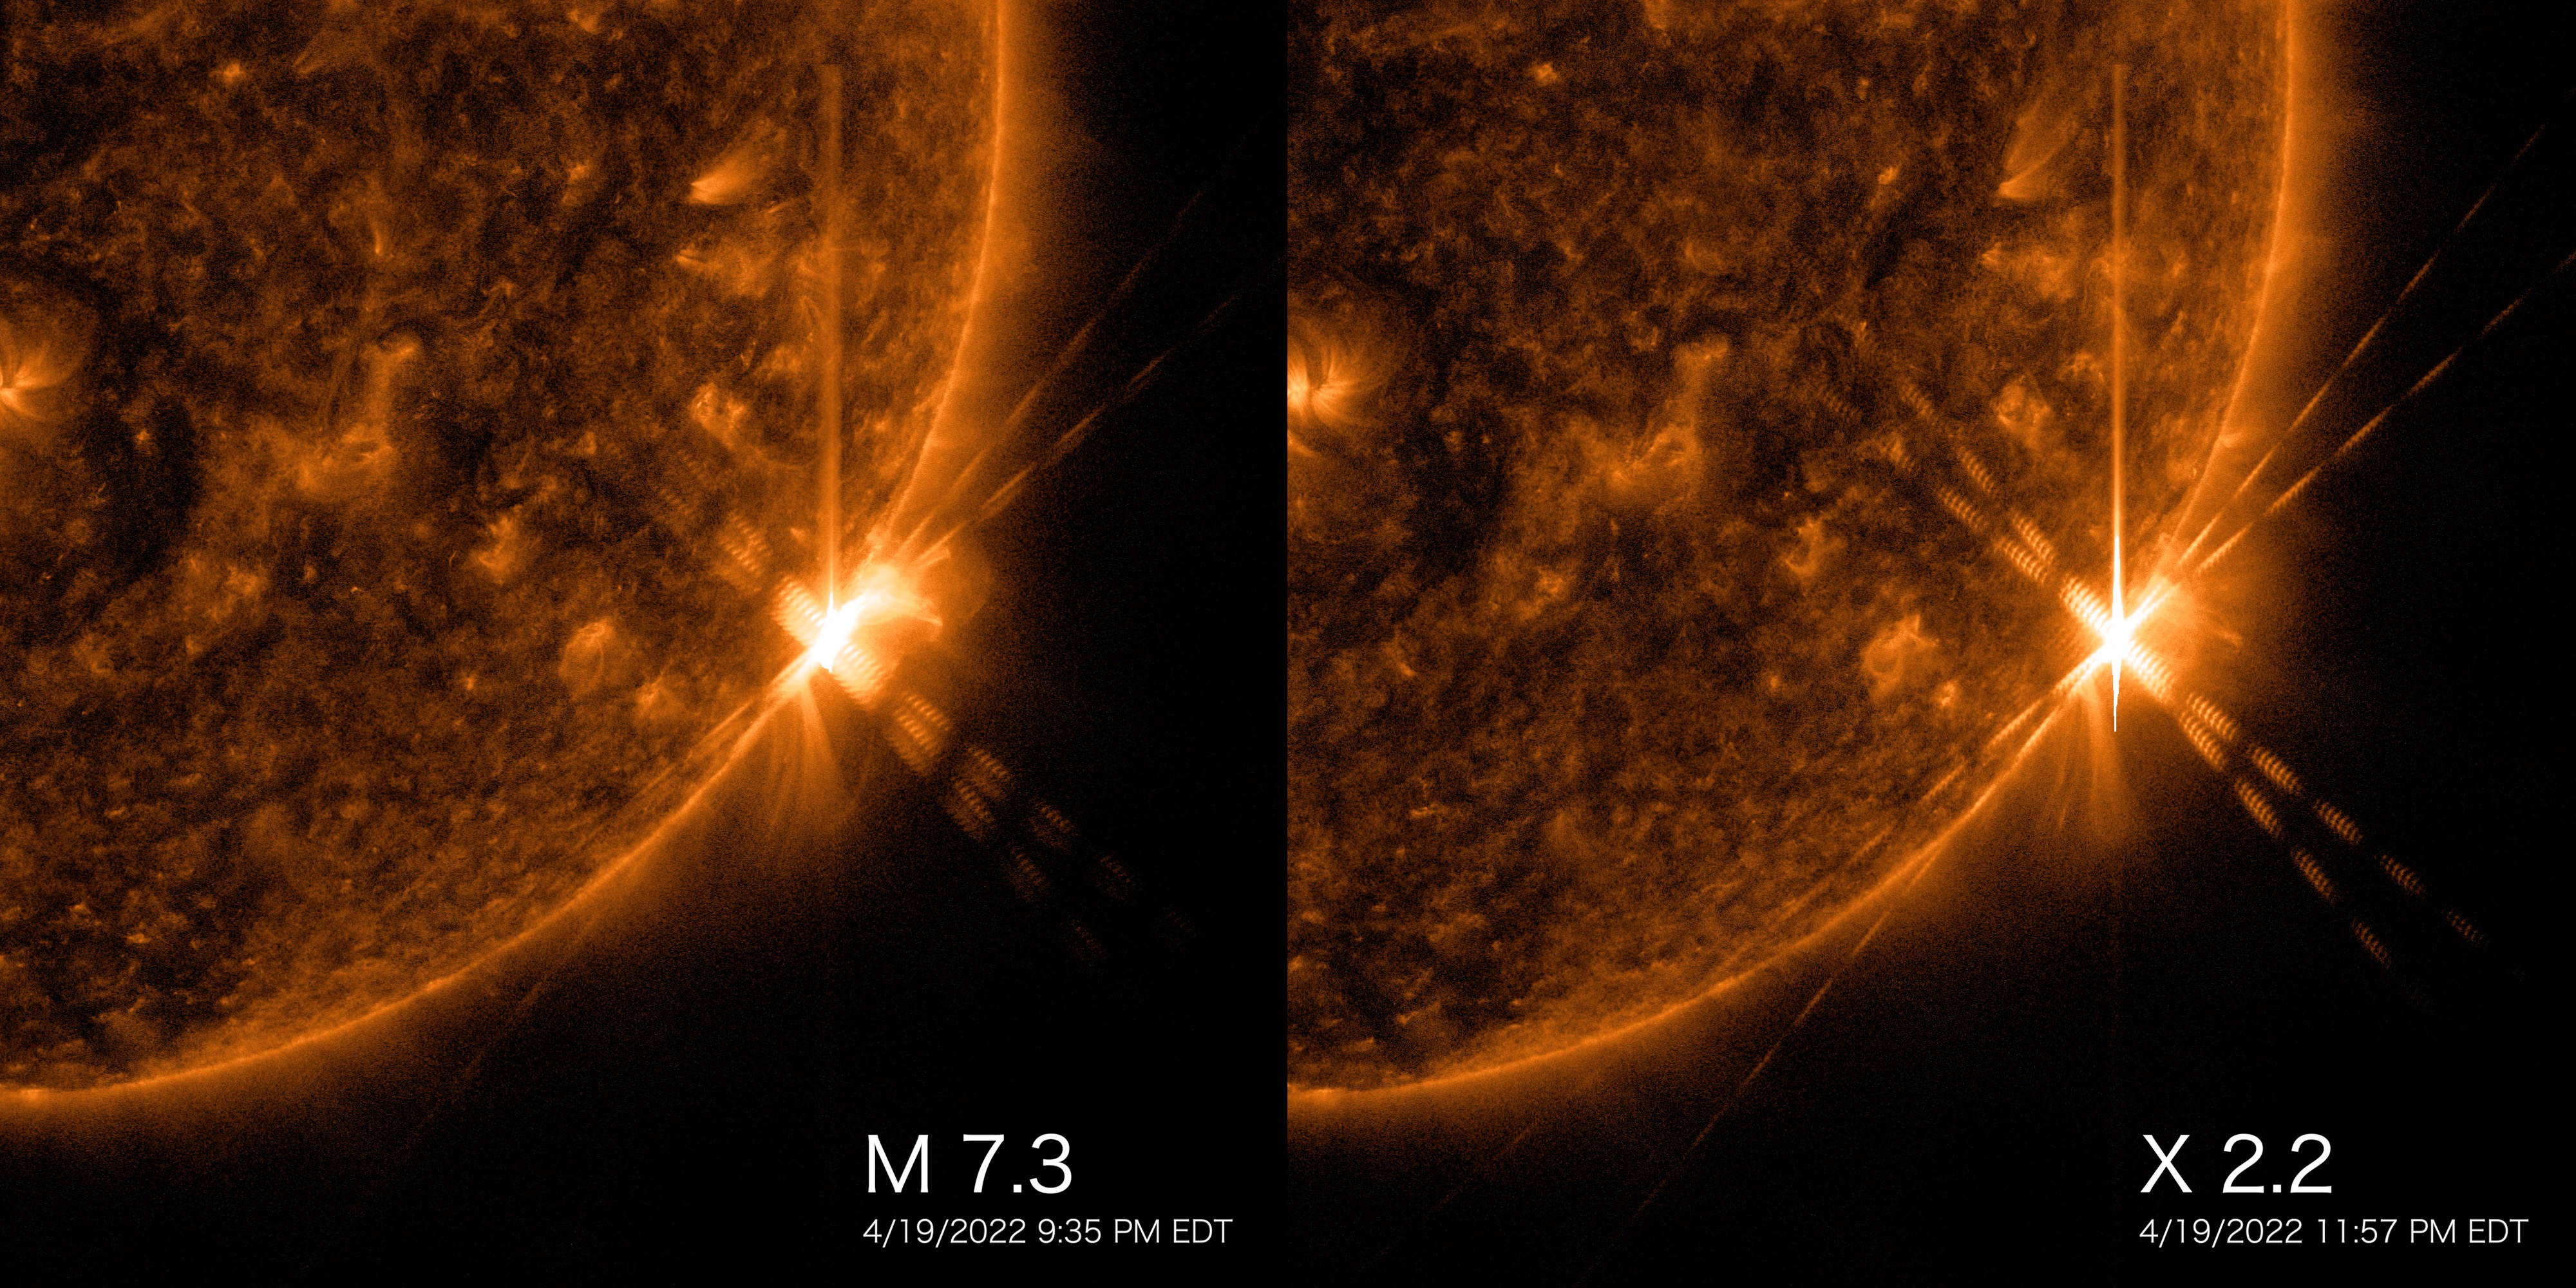 Side-by-side images of the two solar flares that occured on April 19th, 2022. NASA's Solar Dynamics Observatory captured these images in 131 angstrom light, which highlights the extremely hot temperatures of flares.Credit: NASA/SDO